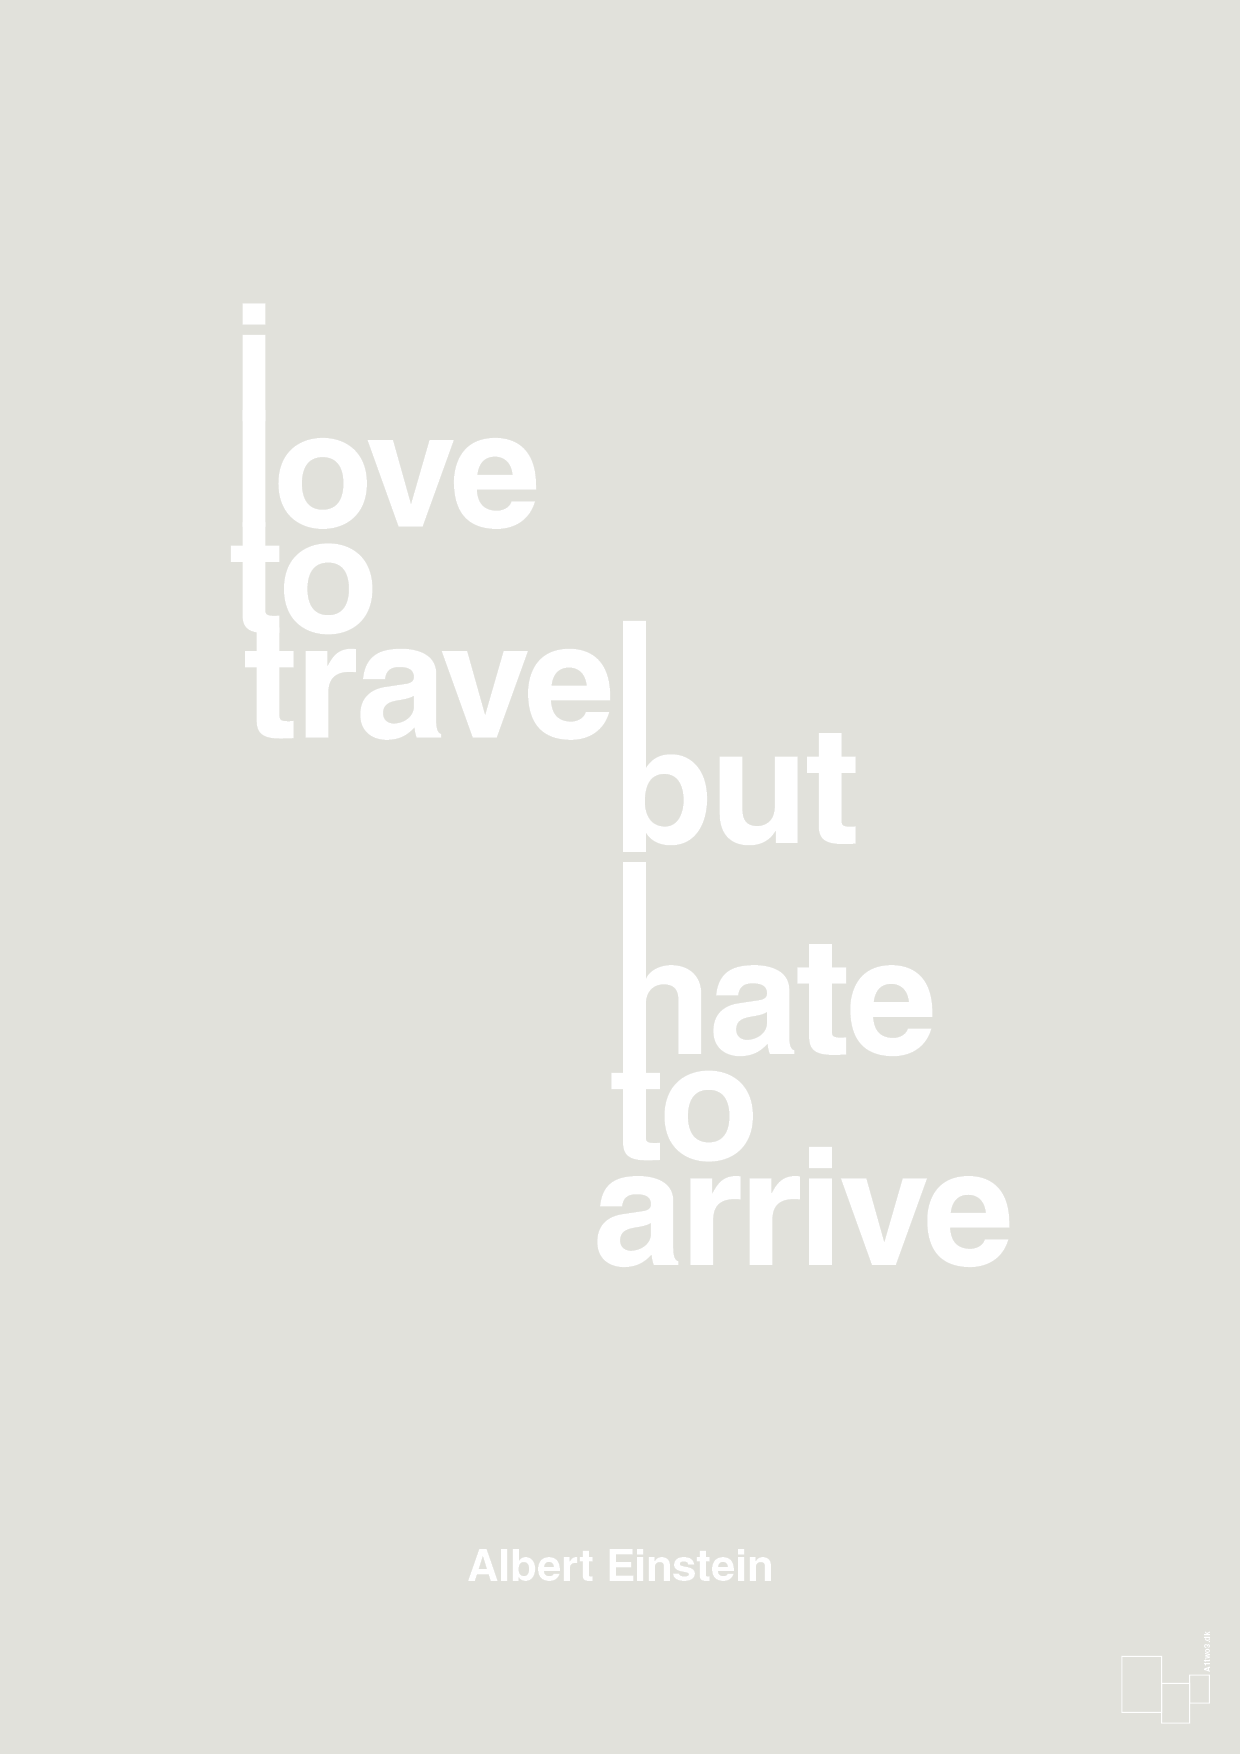 i love to travel but hate to arrive - Plakat med Citater i Painters White